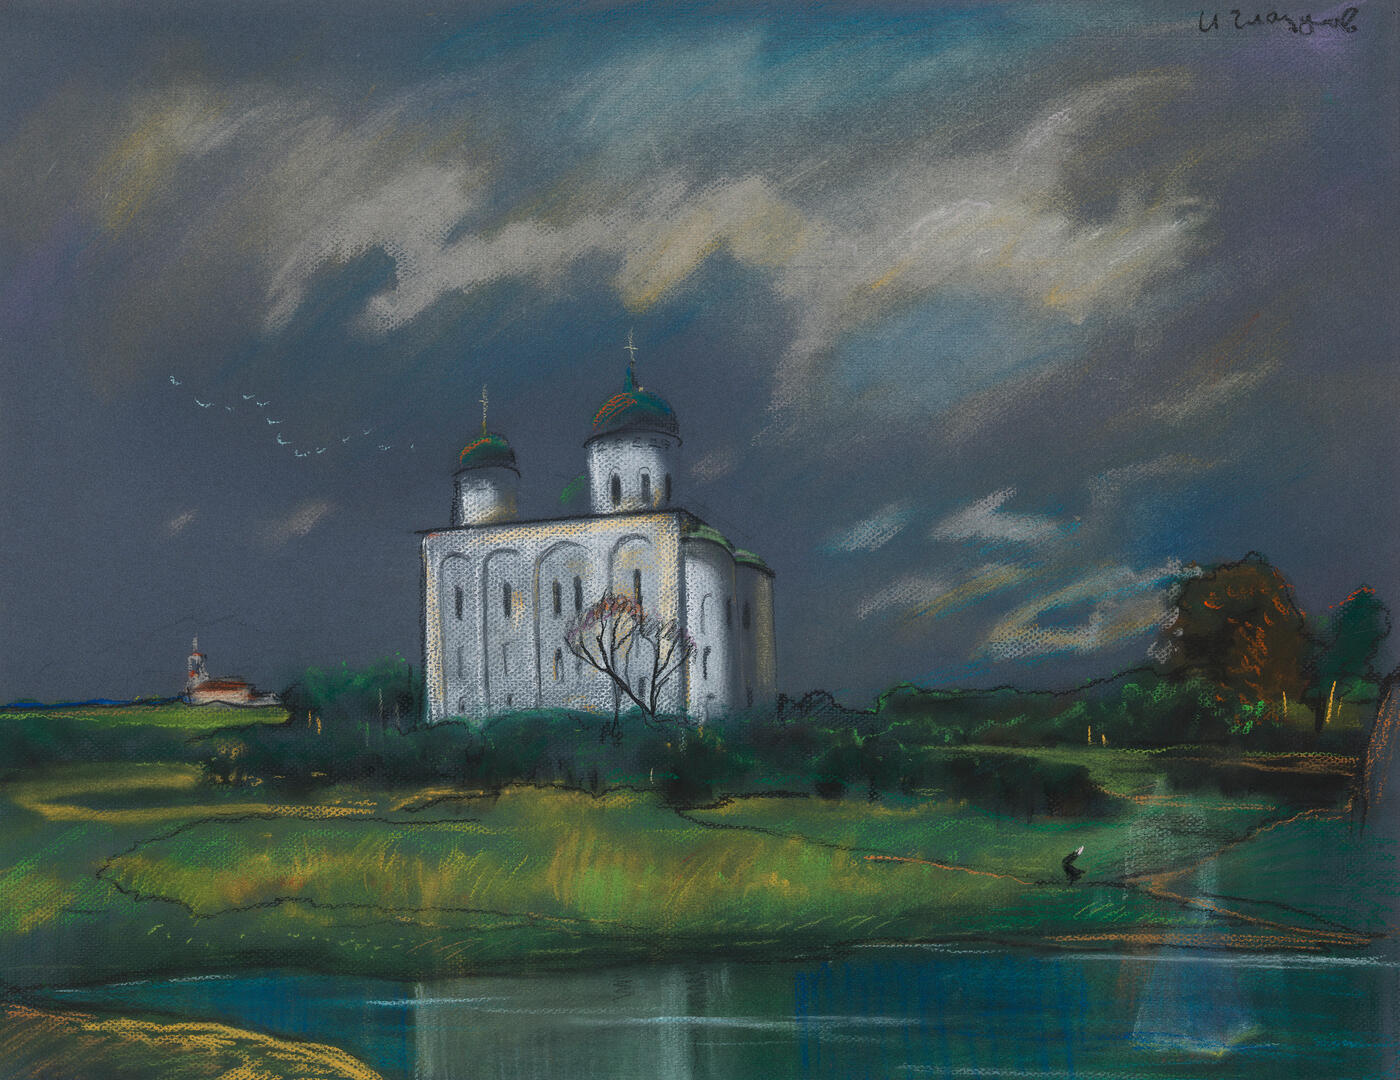 St George's Cathedral of the Yuriev Monastery near Novgorod